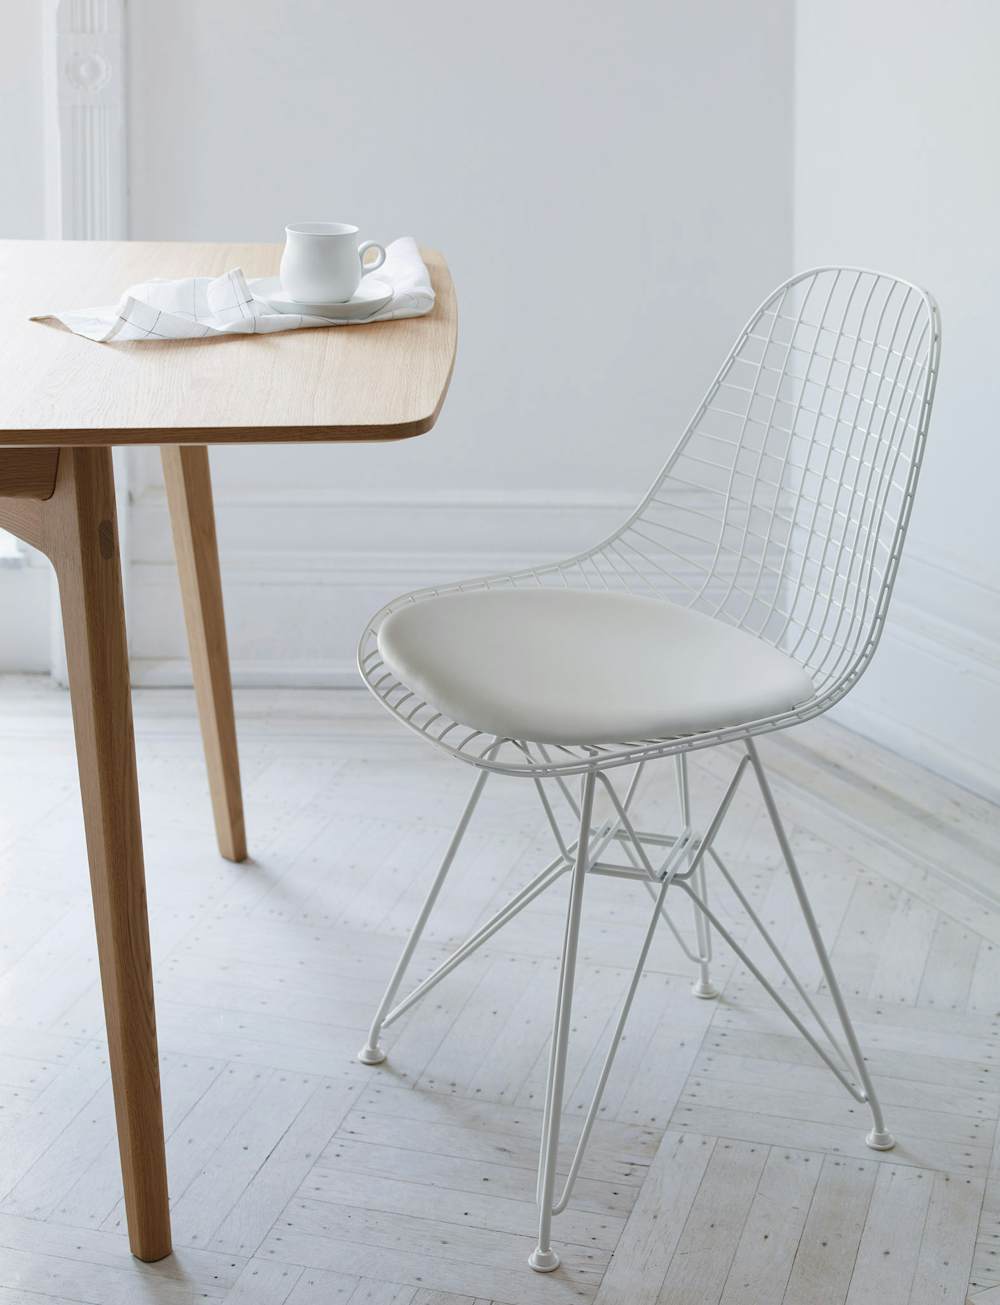 Eames Wire Side Chair with Seat Pad at a dining table